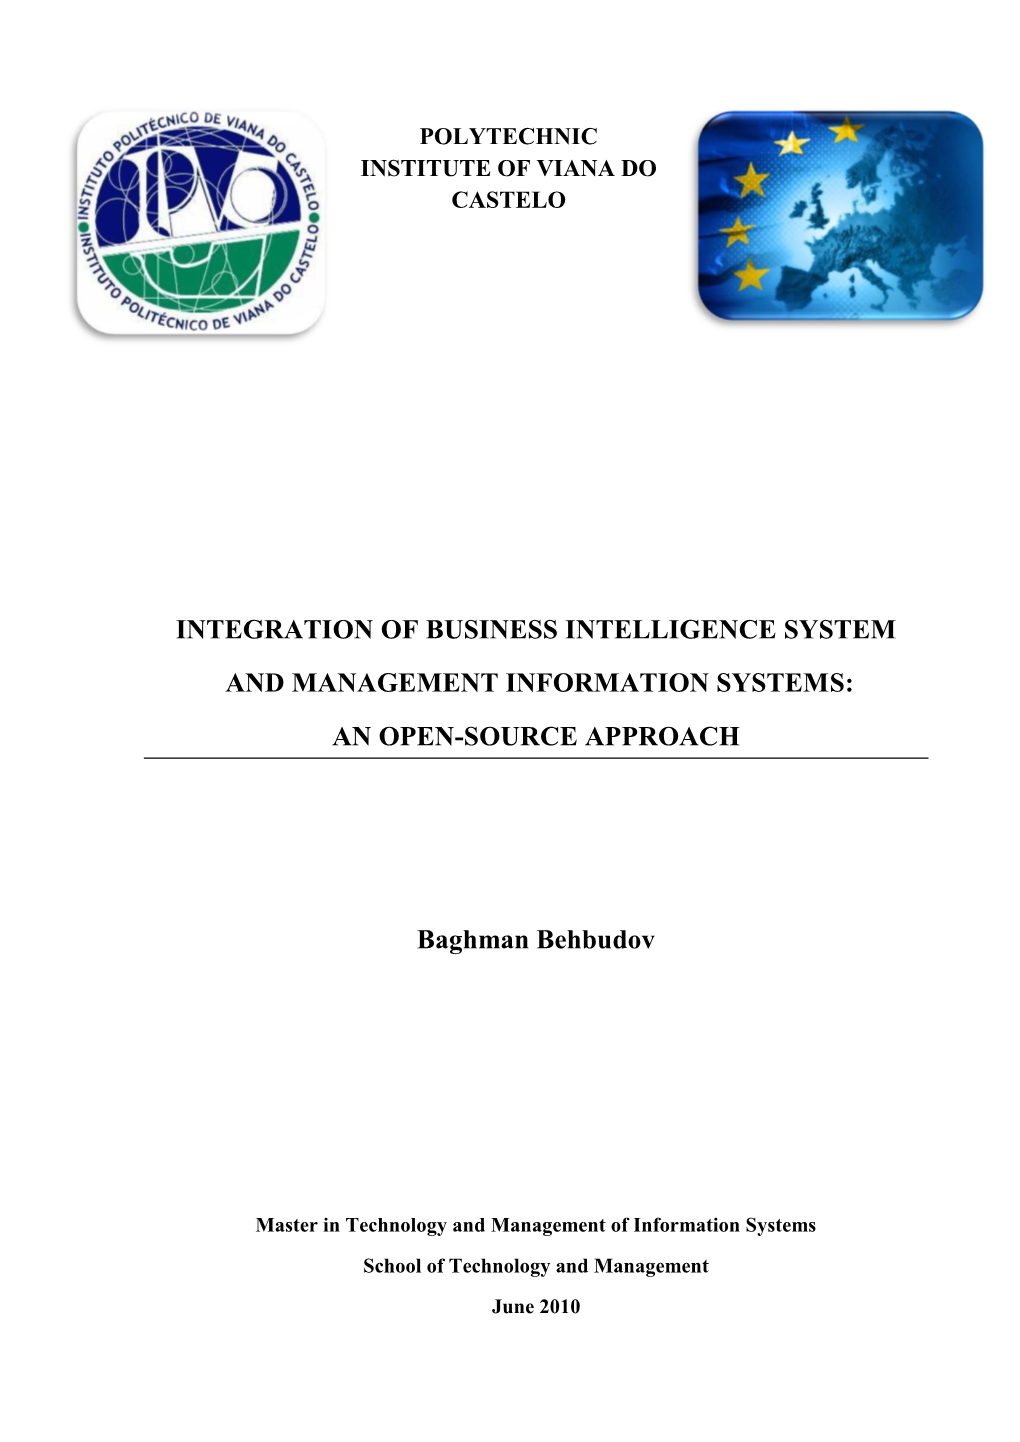 Integration of Business Intelligence System and Management Information Systems: an Open-Source Approach